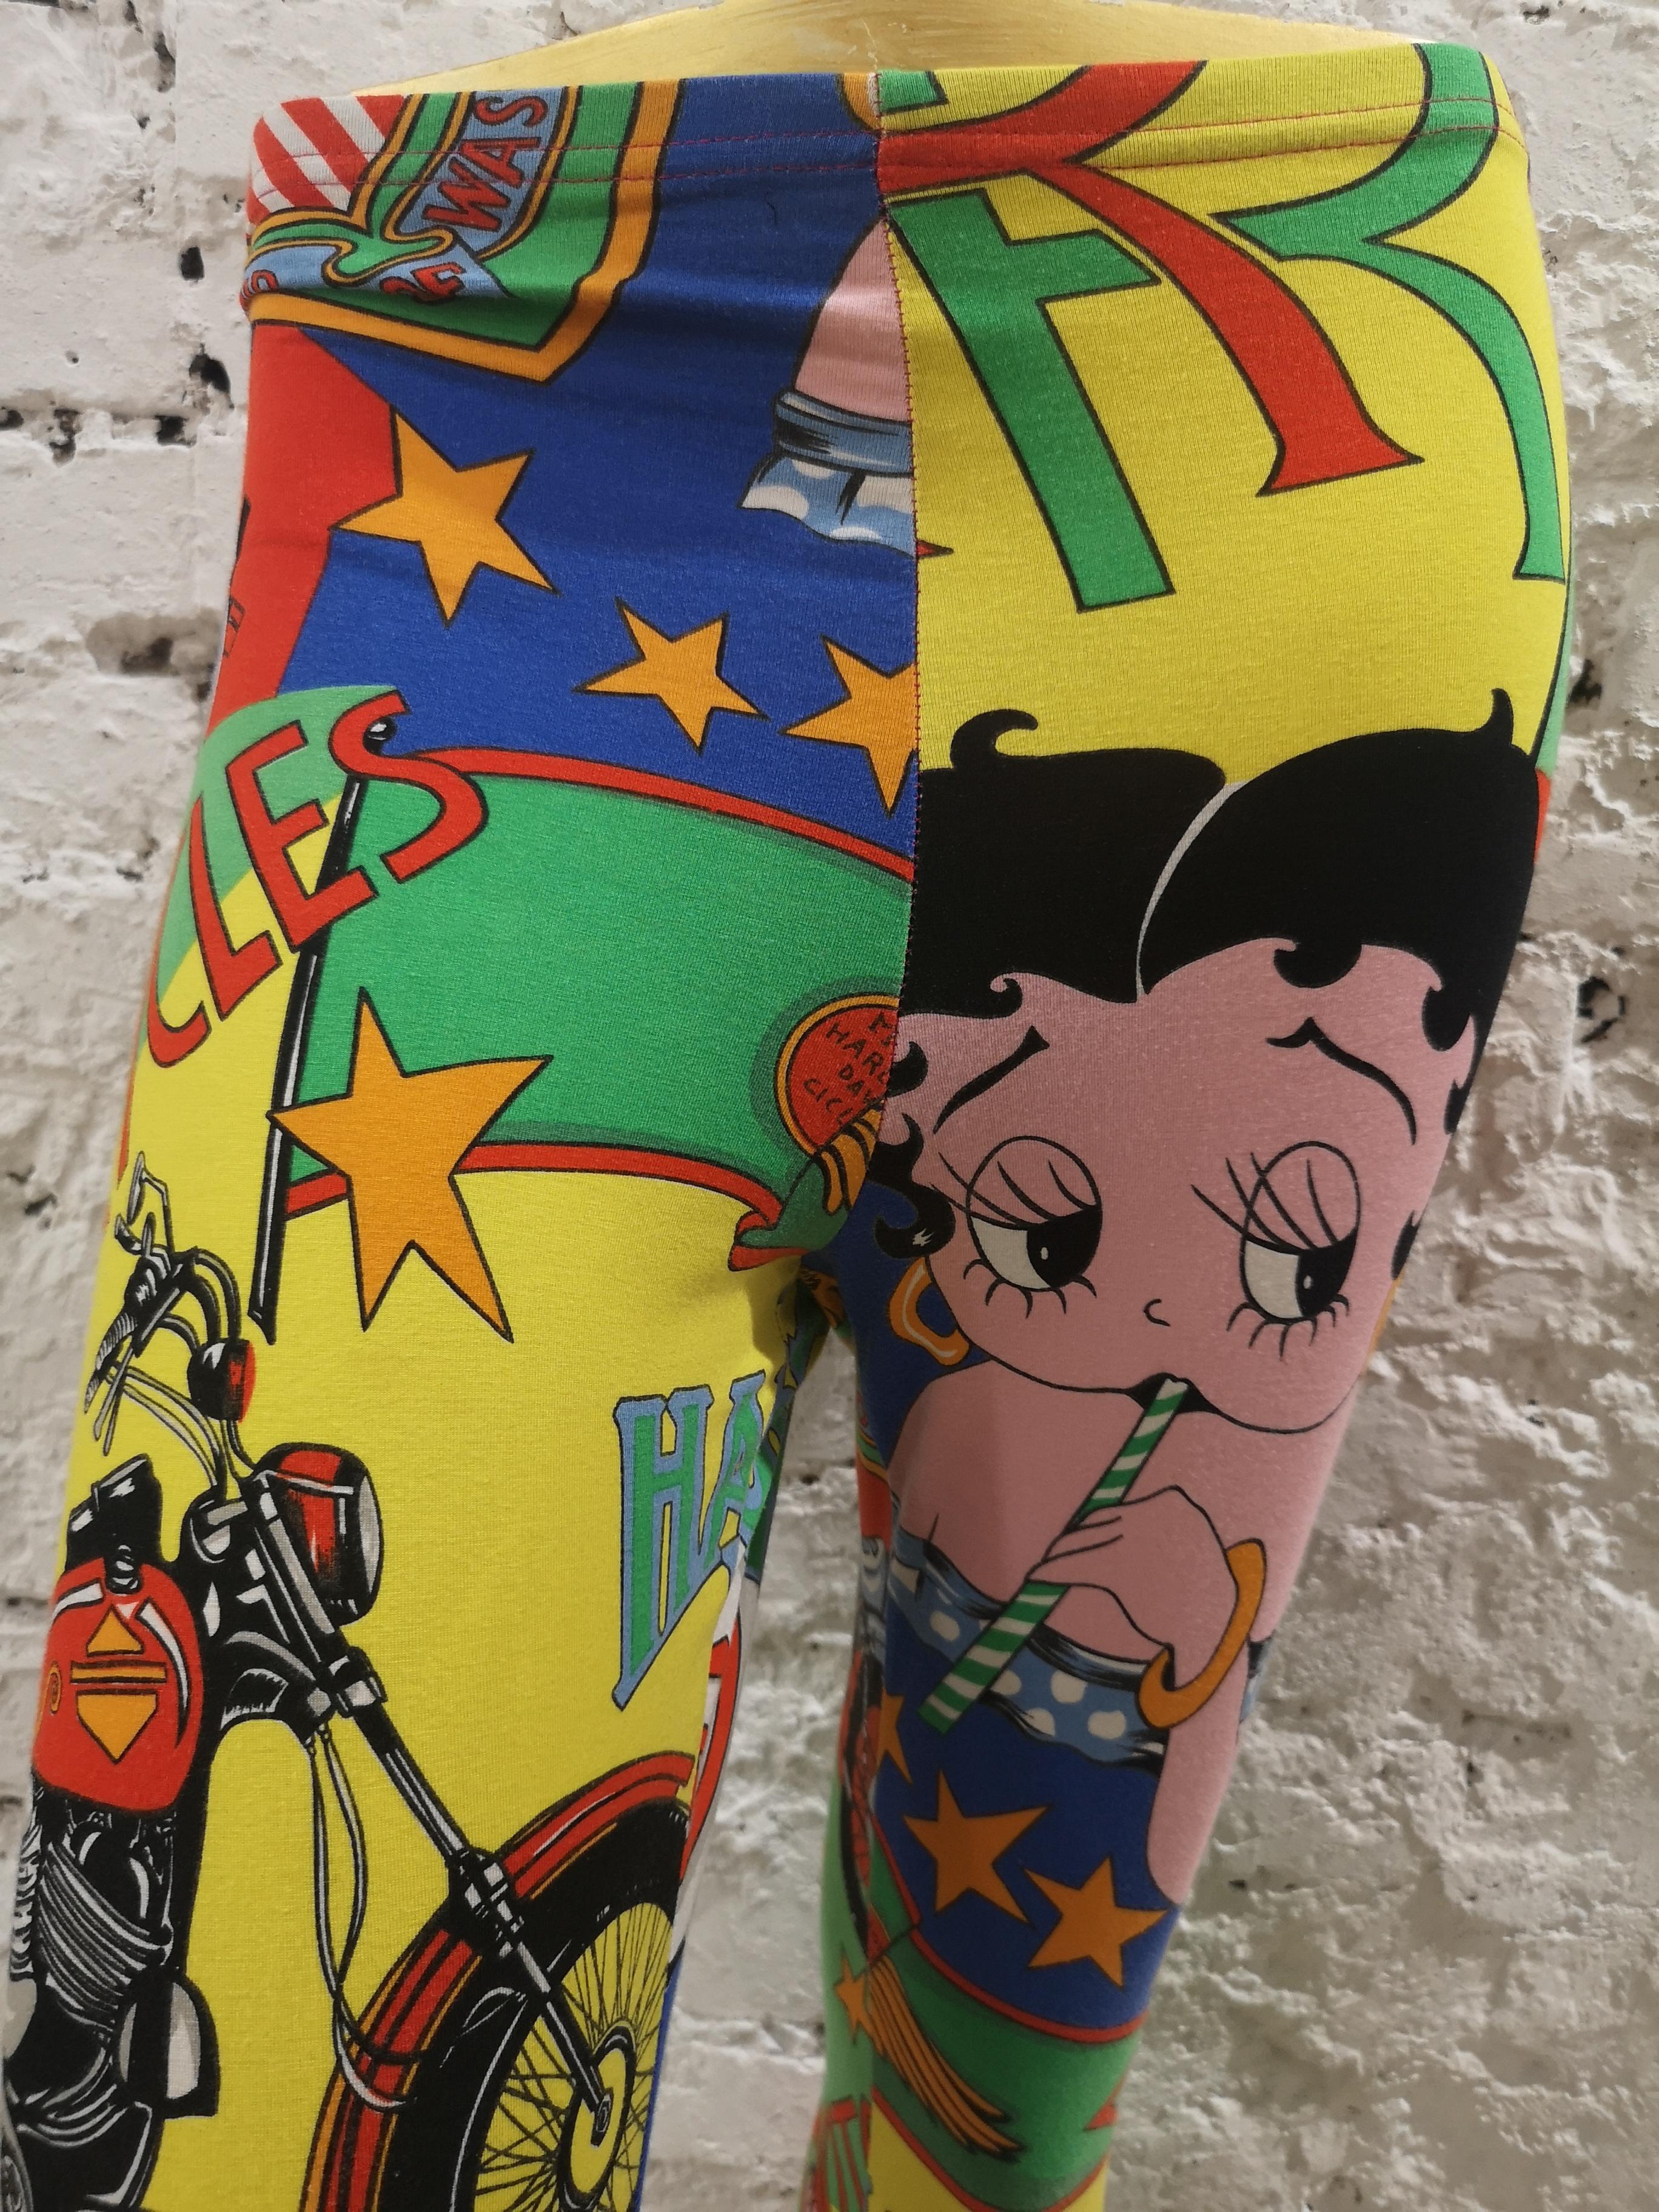 1992 Gianni Versace Betty Boop cotton leggins
totally made in italy in size 46
Composition: Cotton
